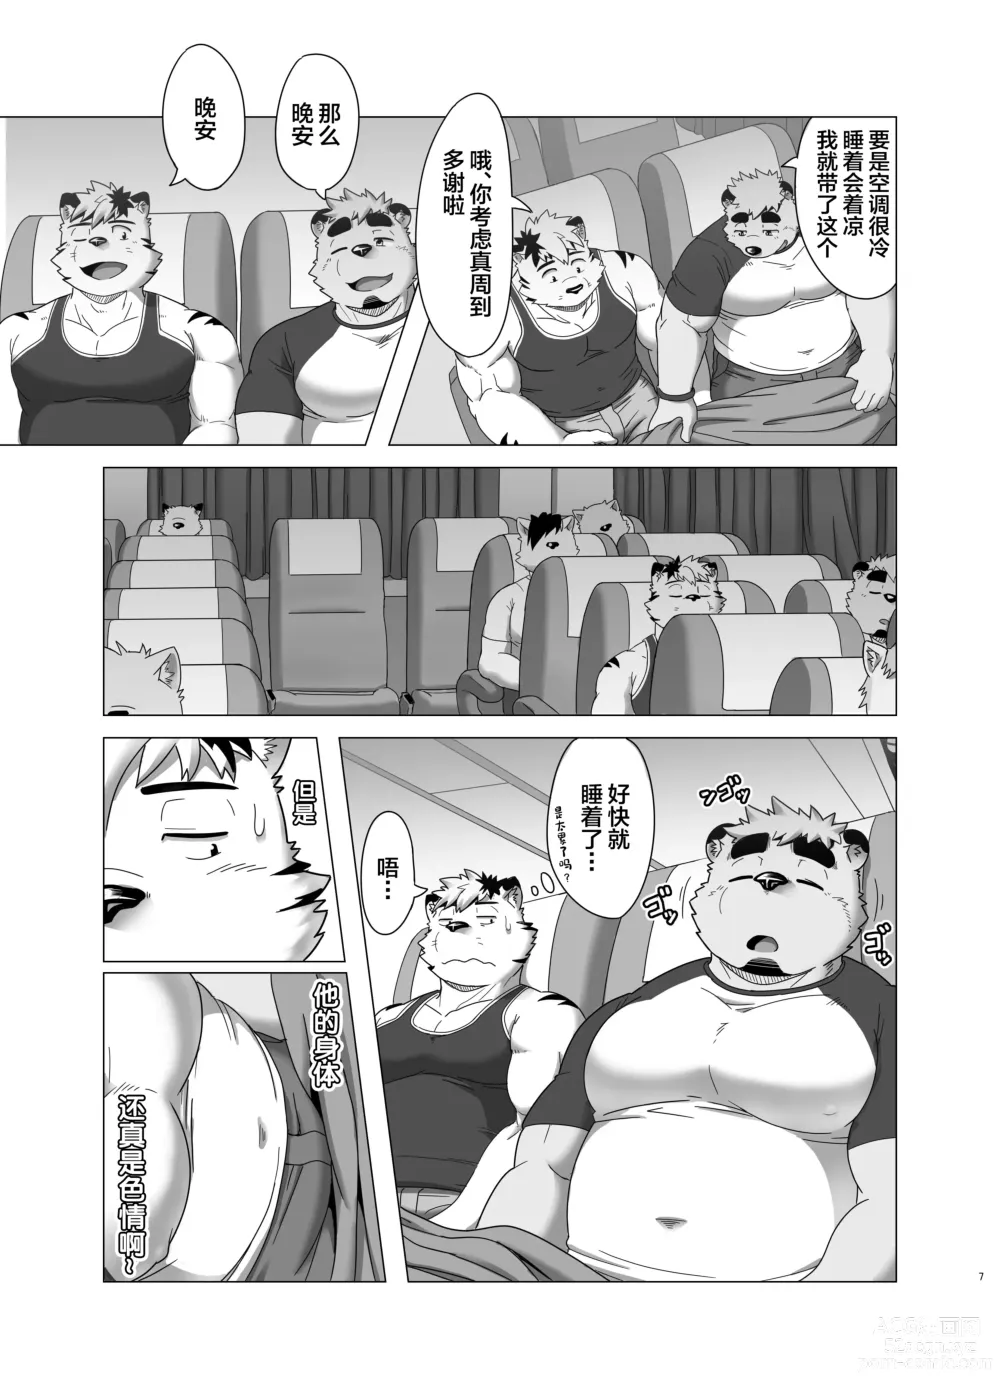 Page 6 of doujinshi MIDNIGHT APPROACH